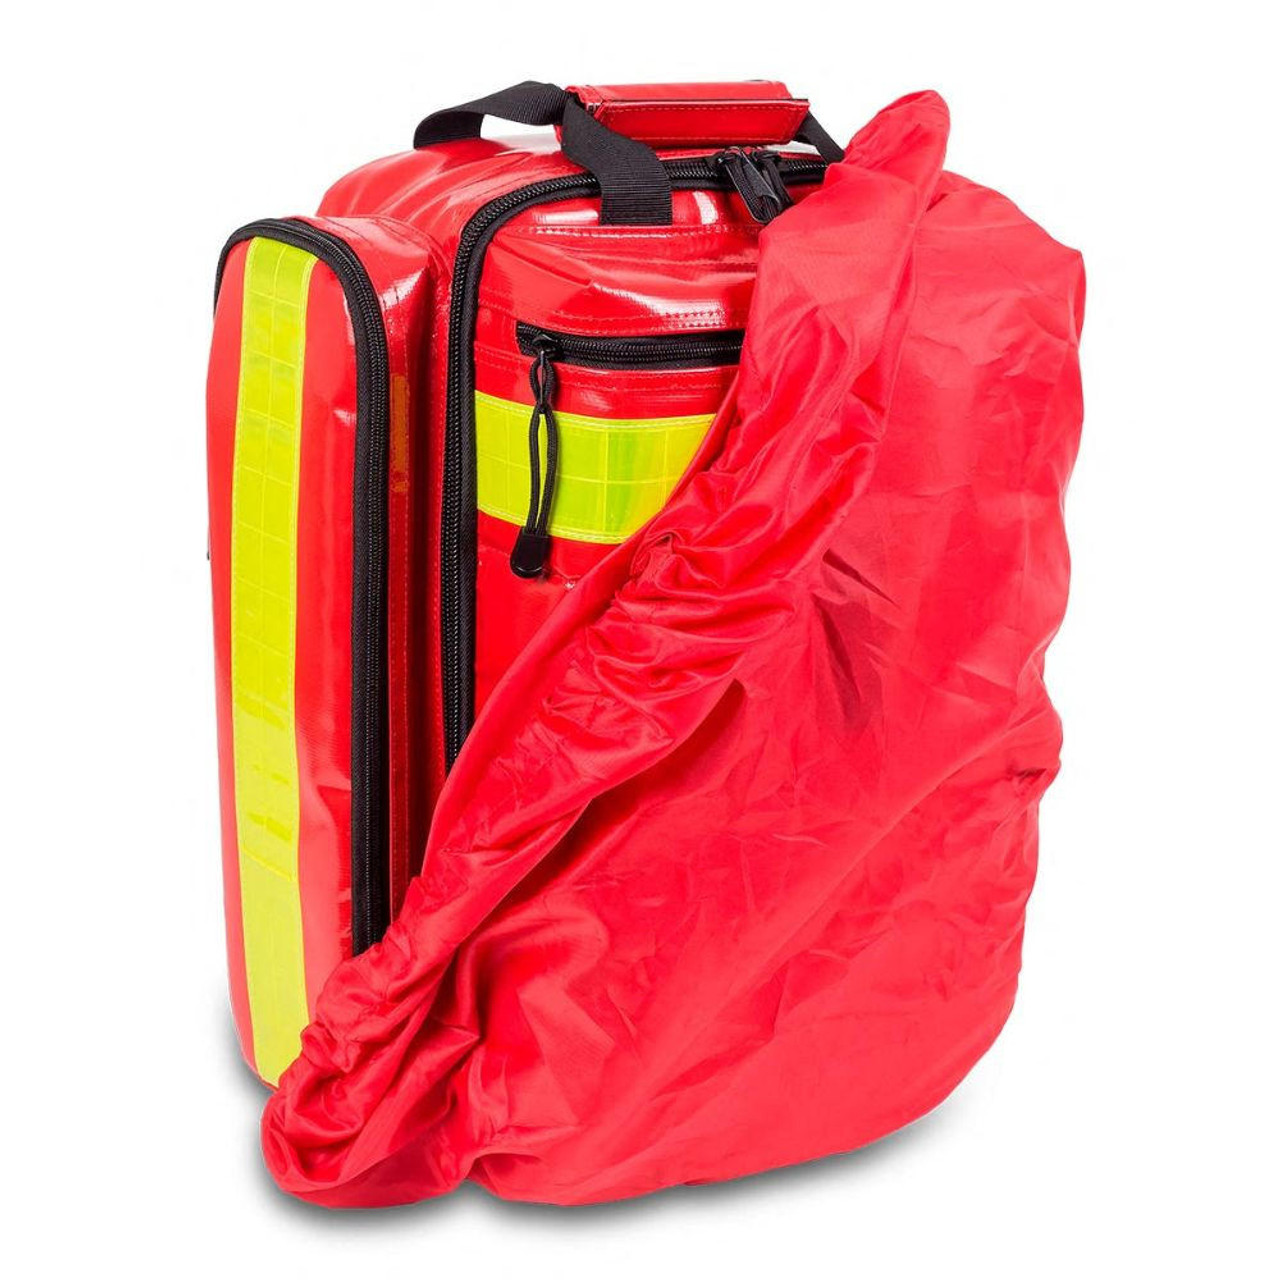  Emergency Medical Rescue Backpack Red PVC 43 Litre 